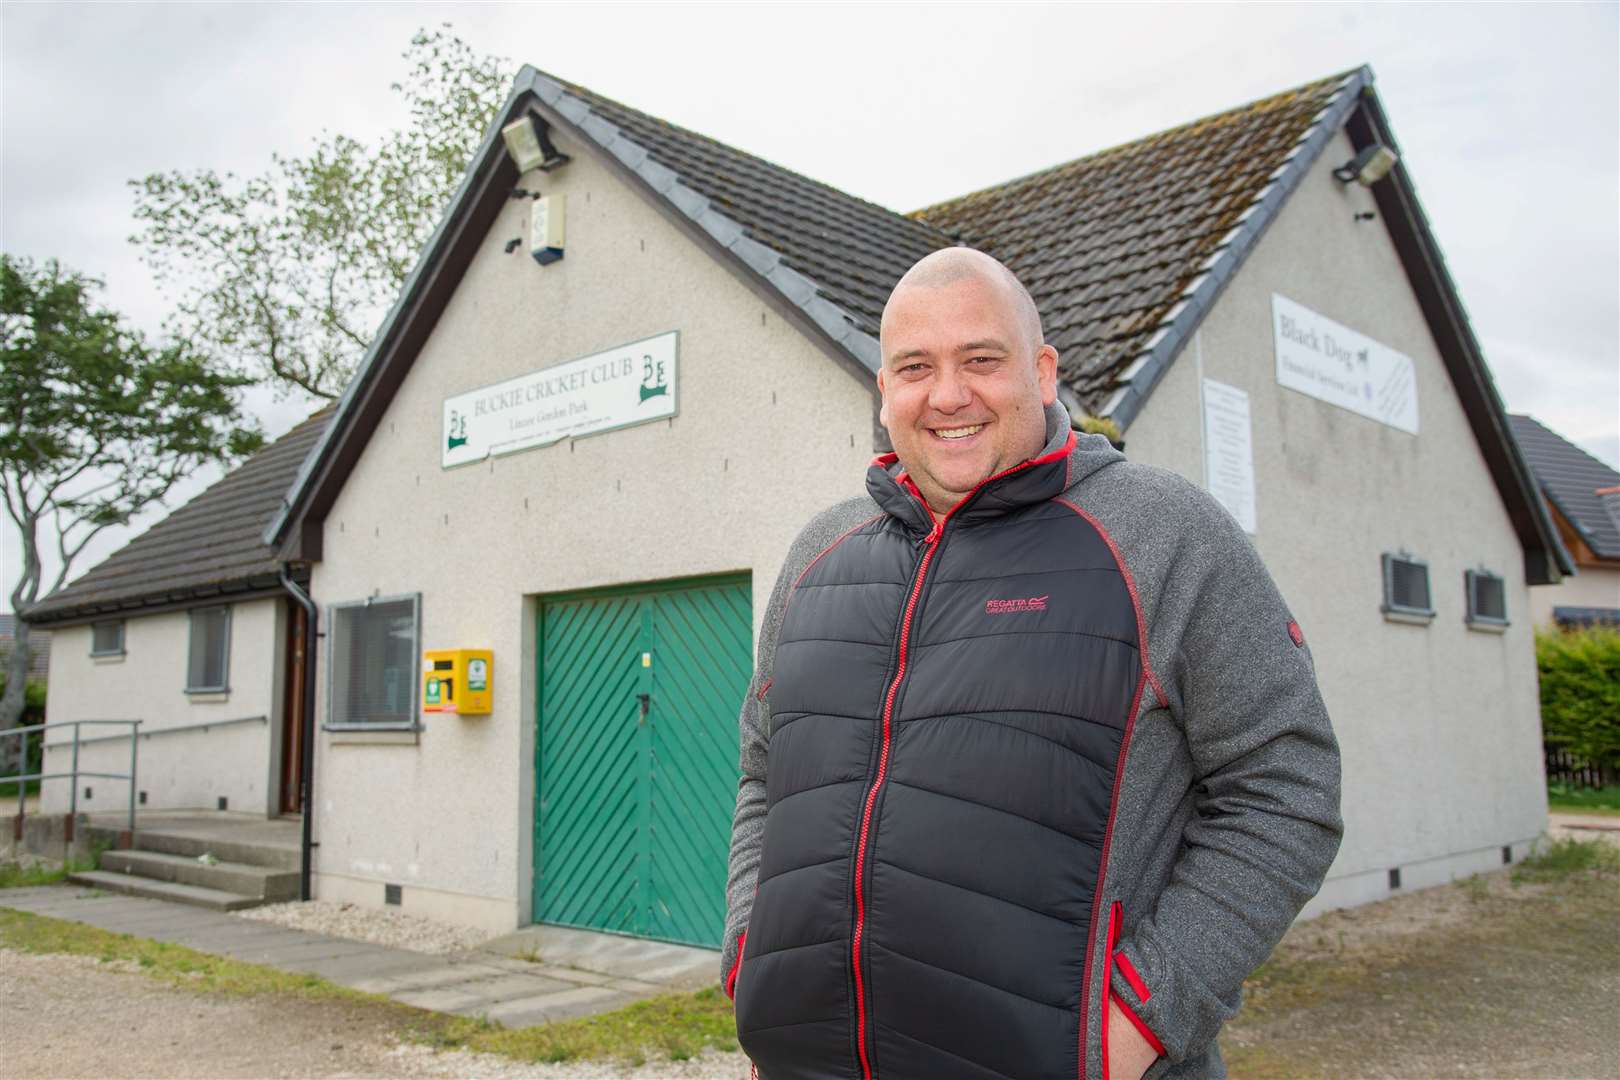 Buckie Cricket Club's new president Andy Ballantyne is looking to build for next season. Picture: Daniel Forsyth